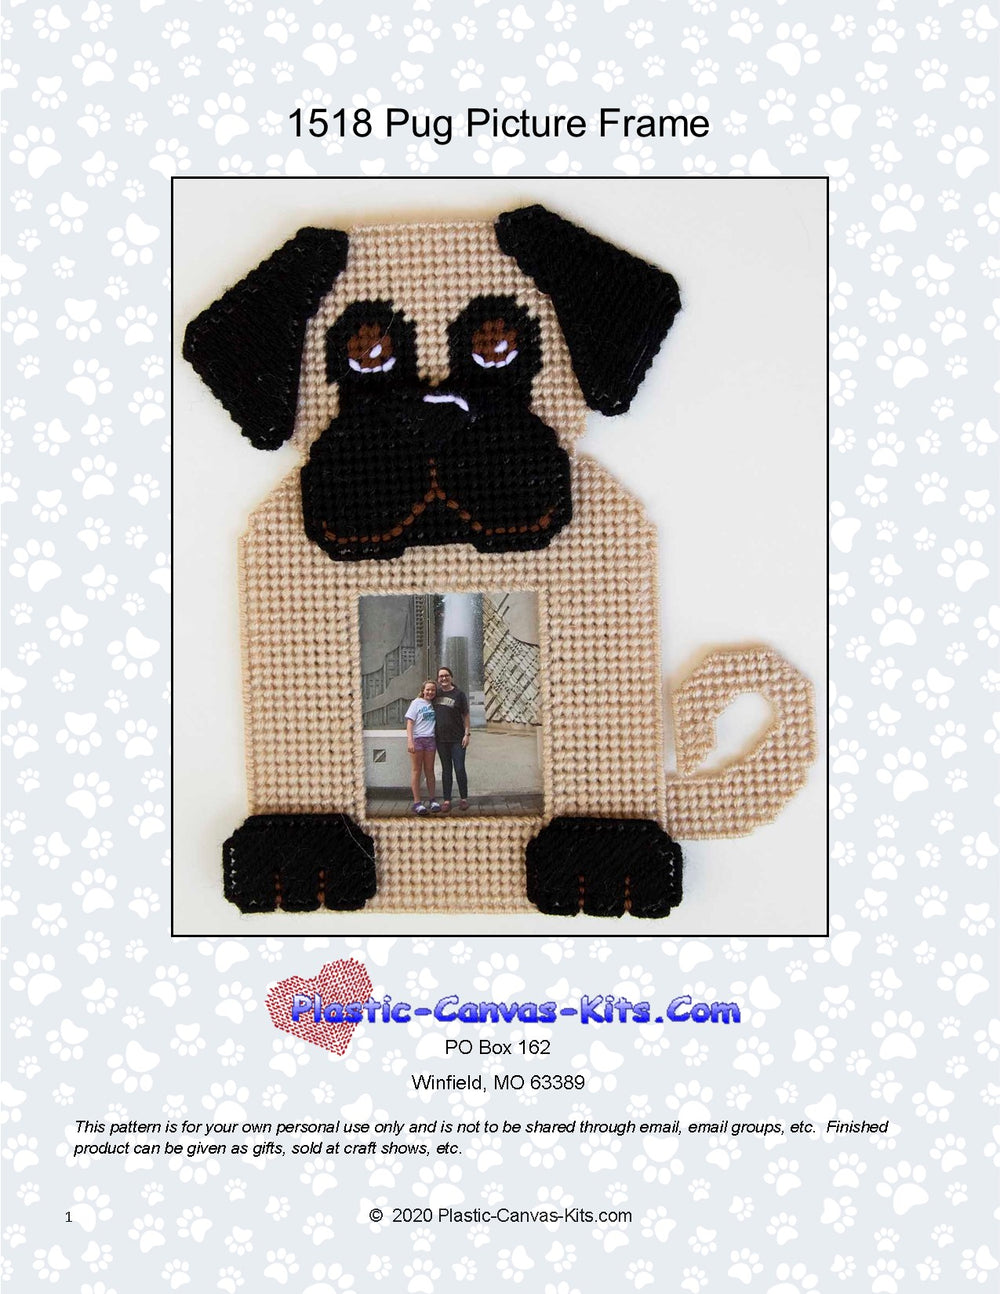 Pug Picture Frame